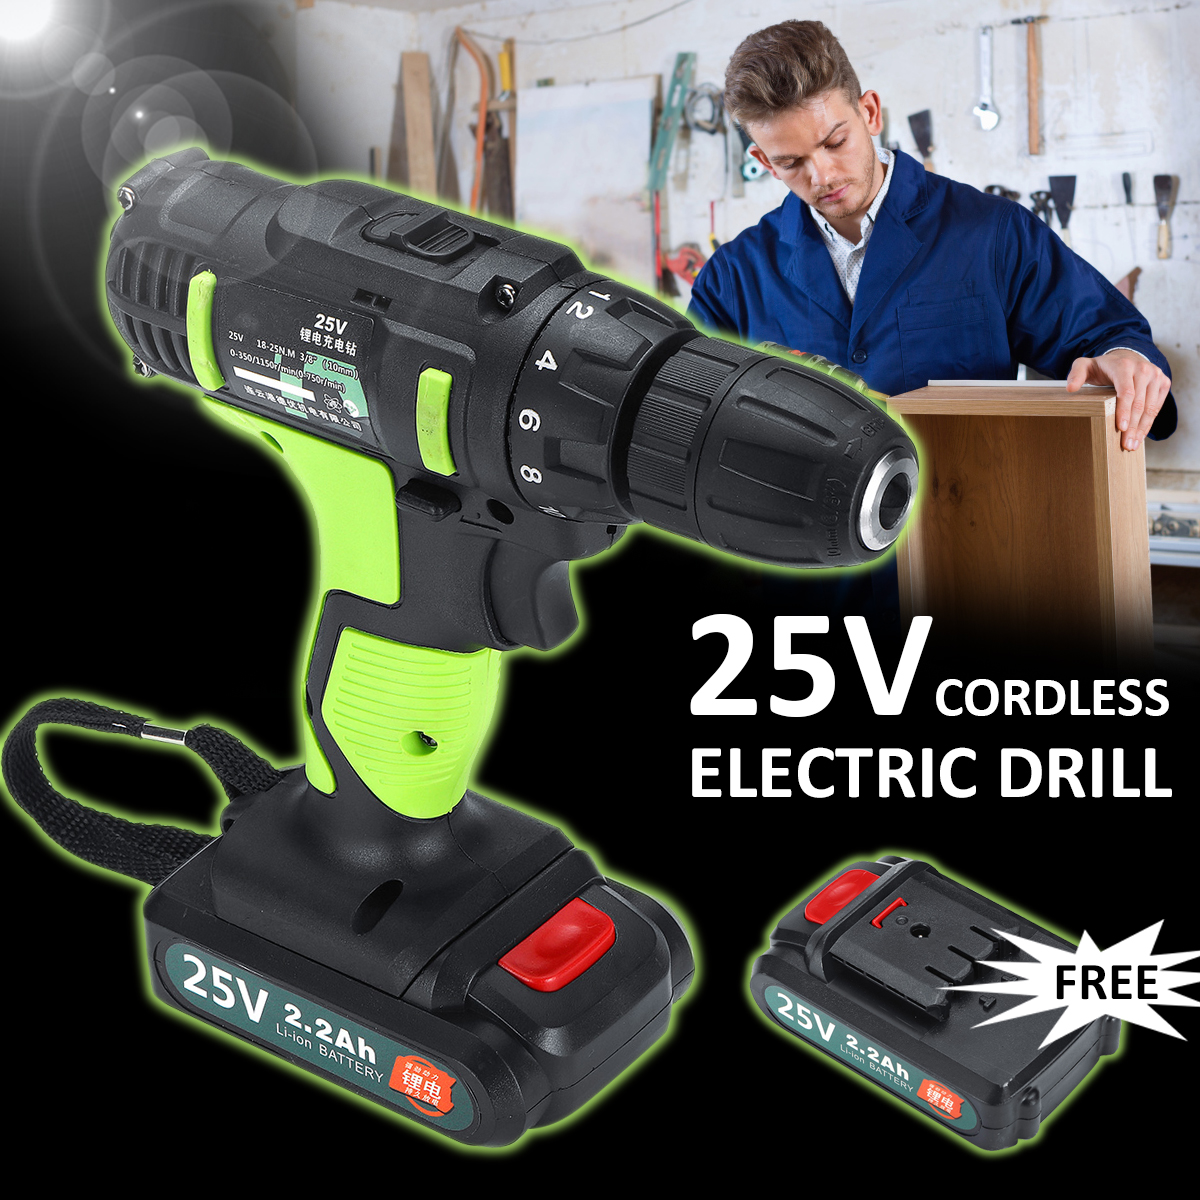 25V-Electric-Screwdriver-22Ah-Li-ion-Battery-Screw-Driver-Drill-Rechargeable-Power-Drill-1370825-4